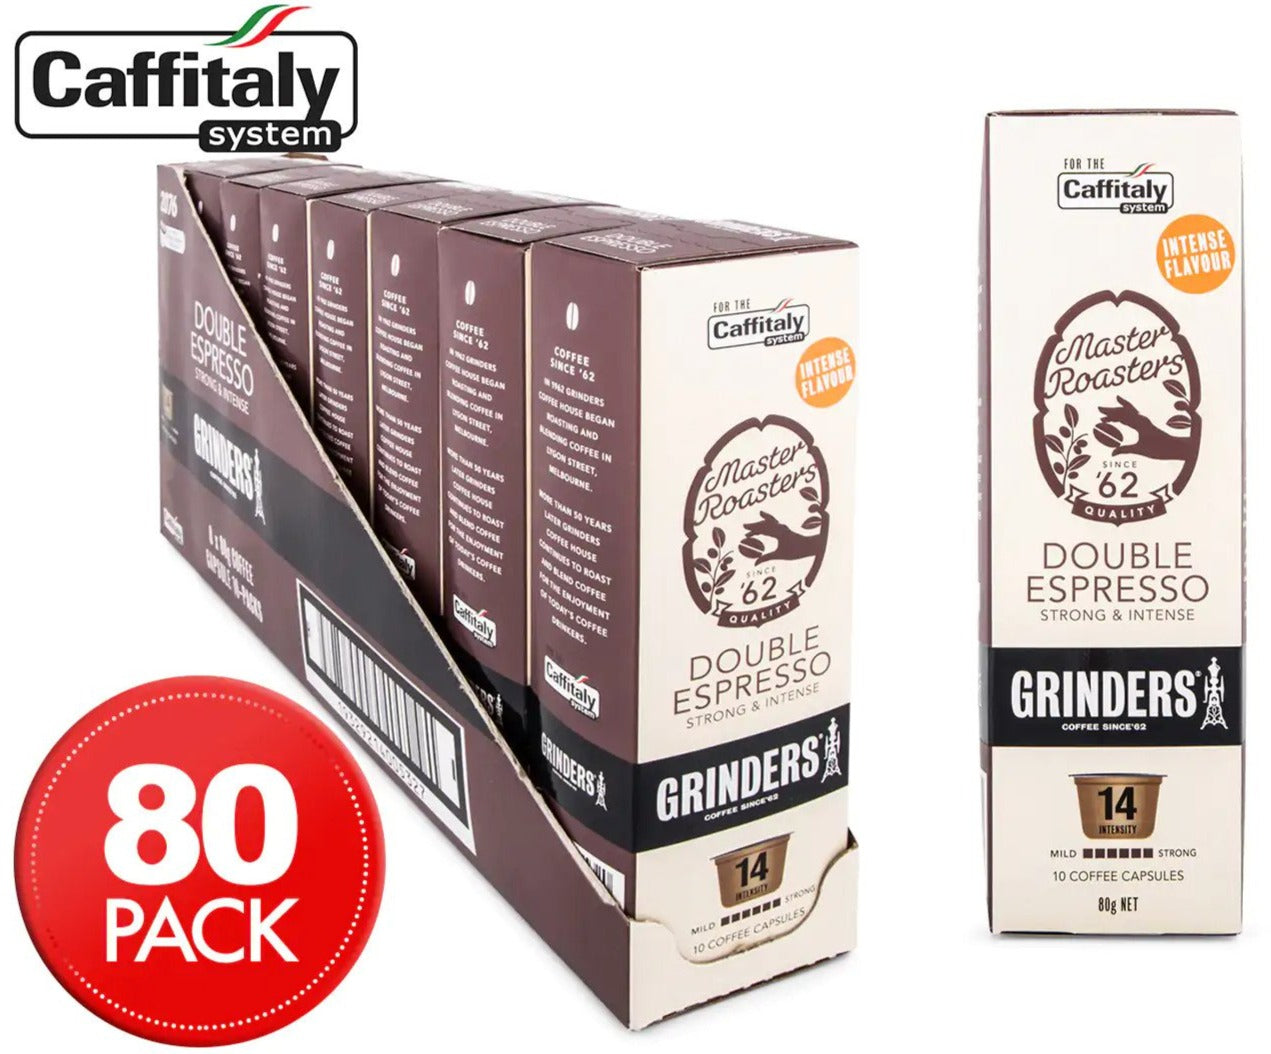 8 x Grinders Master Roasters Double Espresso Caffitaly Coffee Capsules 10pk